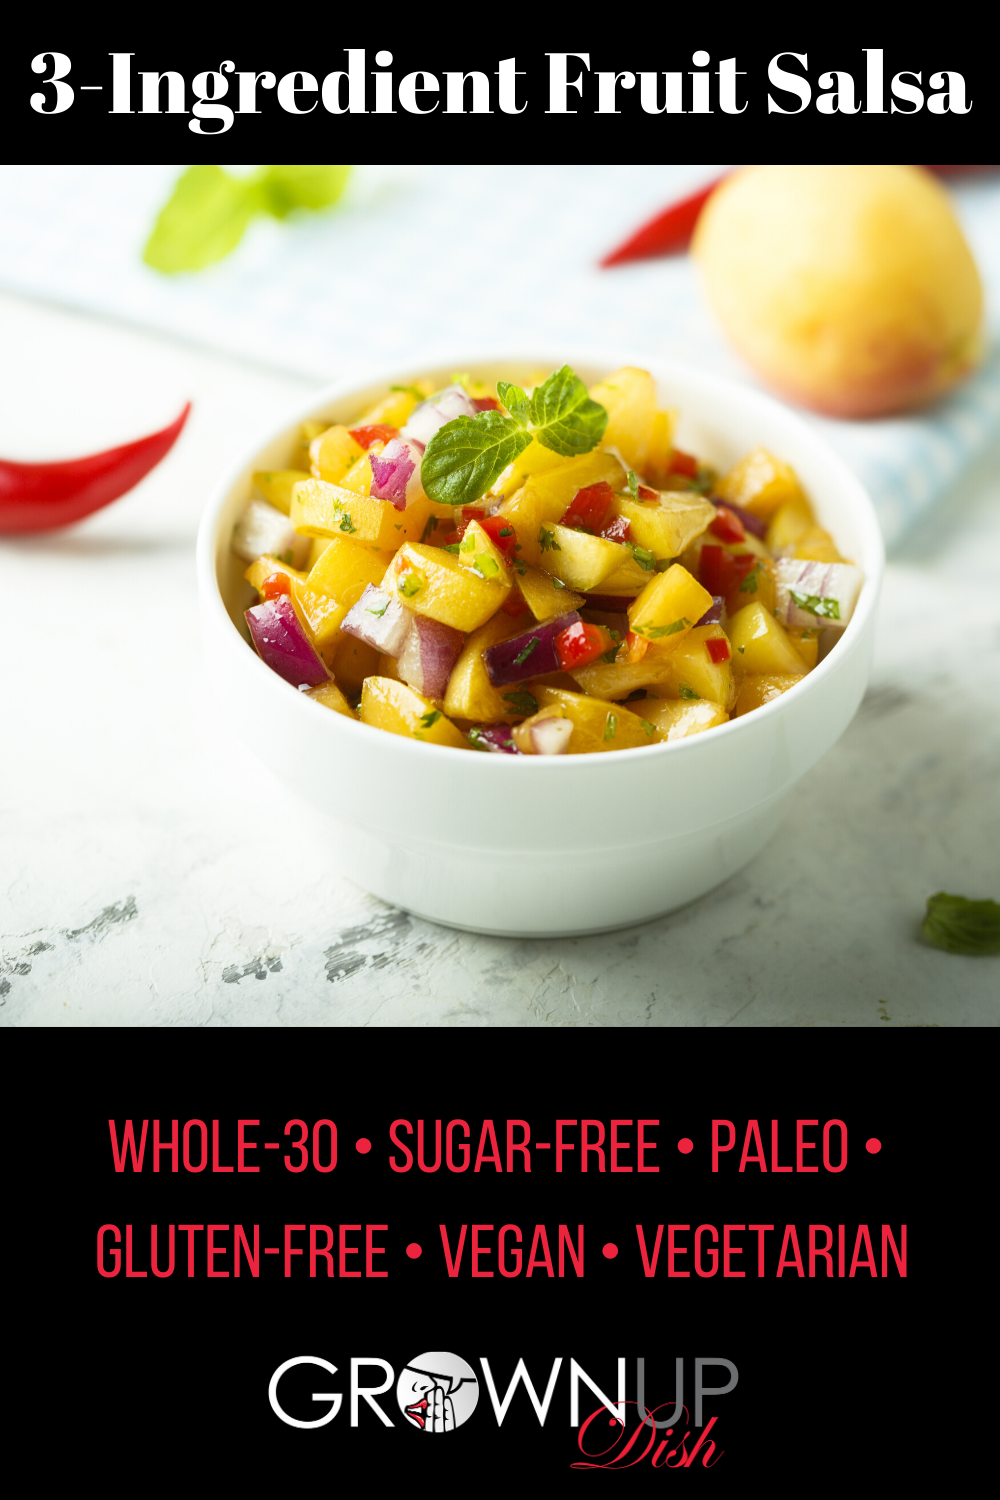 This sweet and savory Whole-30 3-ingredient fruit salsa elevates a simple grilled protein (chicken, fish, pork, steak), makes a great topping for tacos and burritos and is a delicious appetizer when served with chips.  